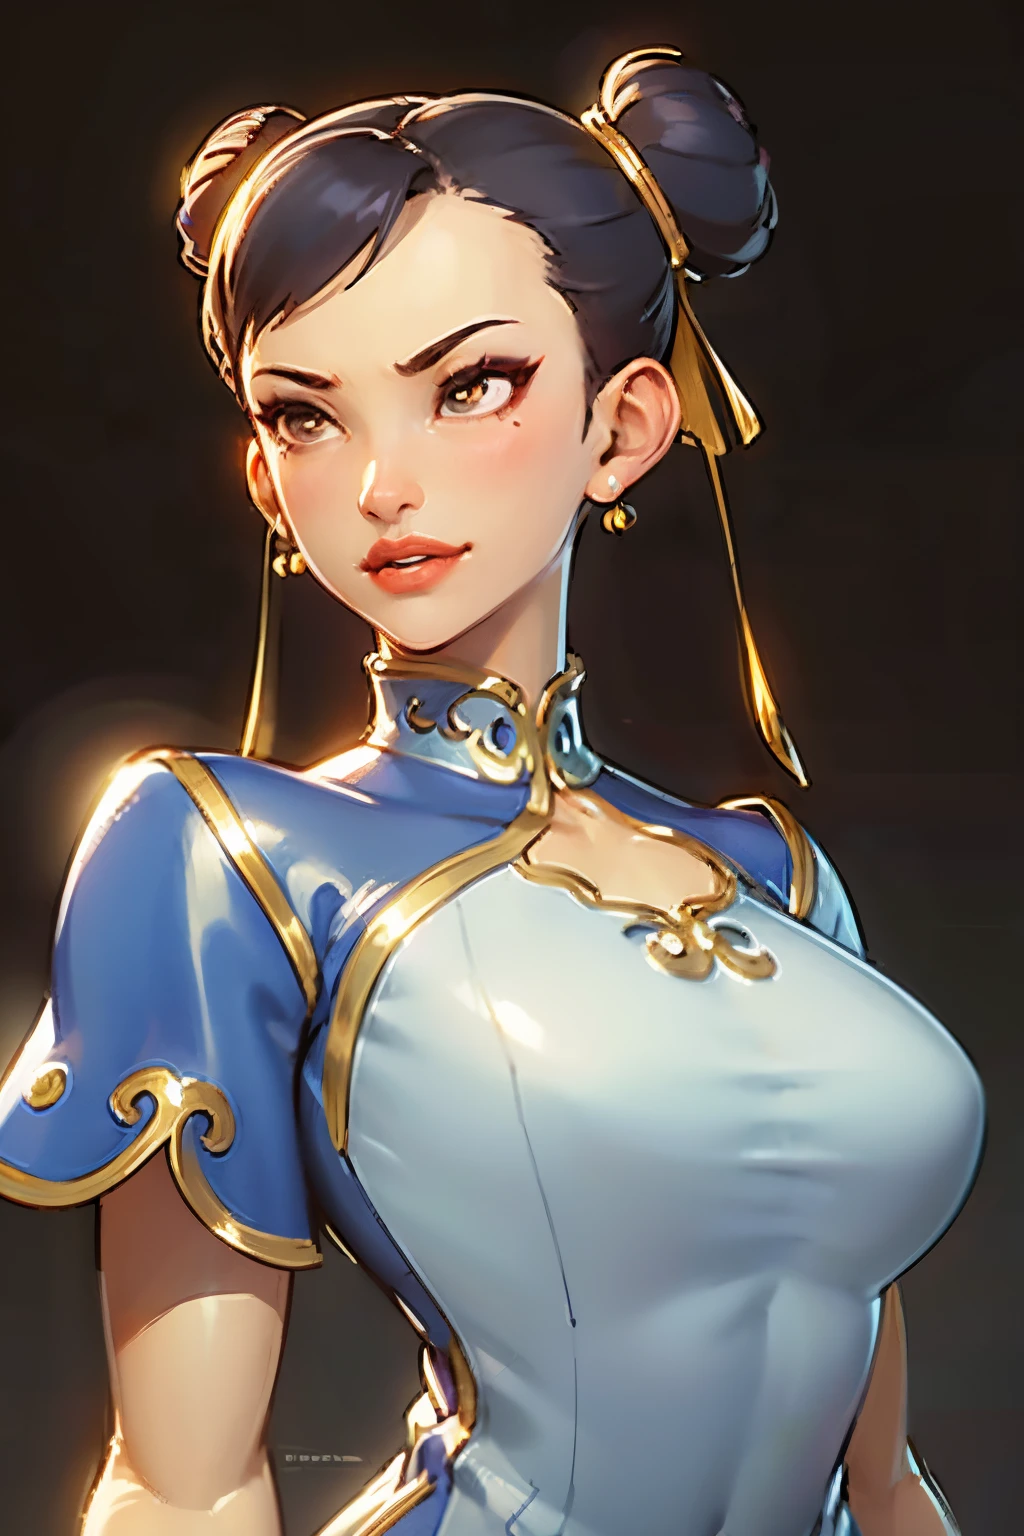 Chun-li, from street fighter,(big breast:1.5),dynamic poses, totally wide open her chest,big chest,super perfect body curve, hair ribbons, twin hair buns, S-shaped body,anime waifu (18 years old)-hot daddy-frivolity-body language, fit figure, bad laughing,gorgeous perfect face, realistic style and super detailed renderings, superrealism,kawaii, zbrush, super-realistic oil, contour shadow-process - (Waiting to start)